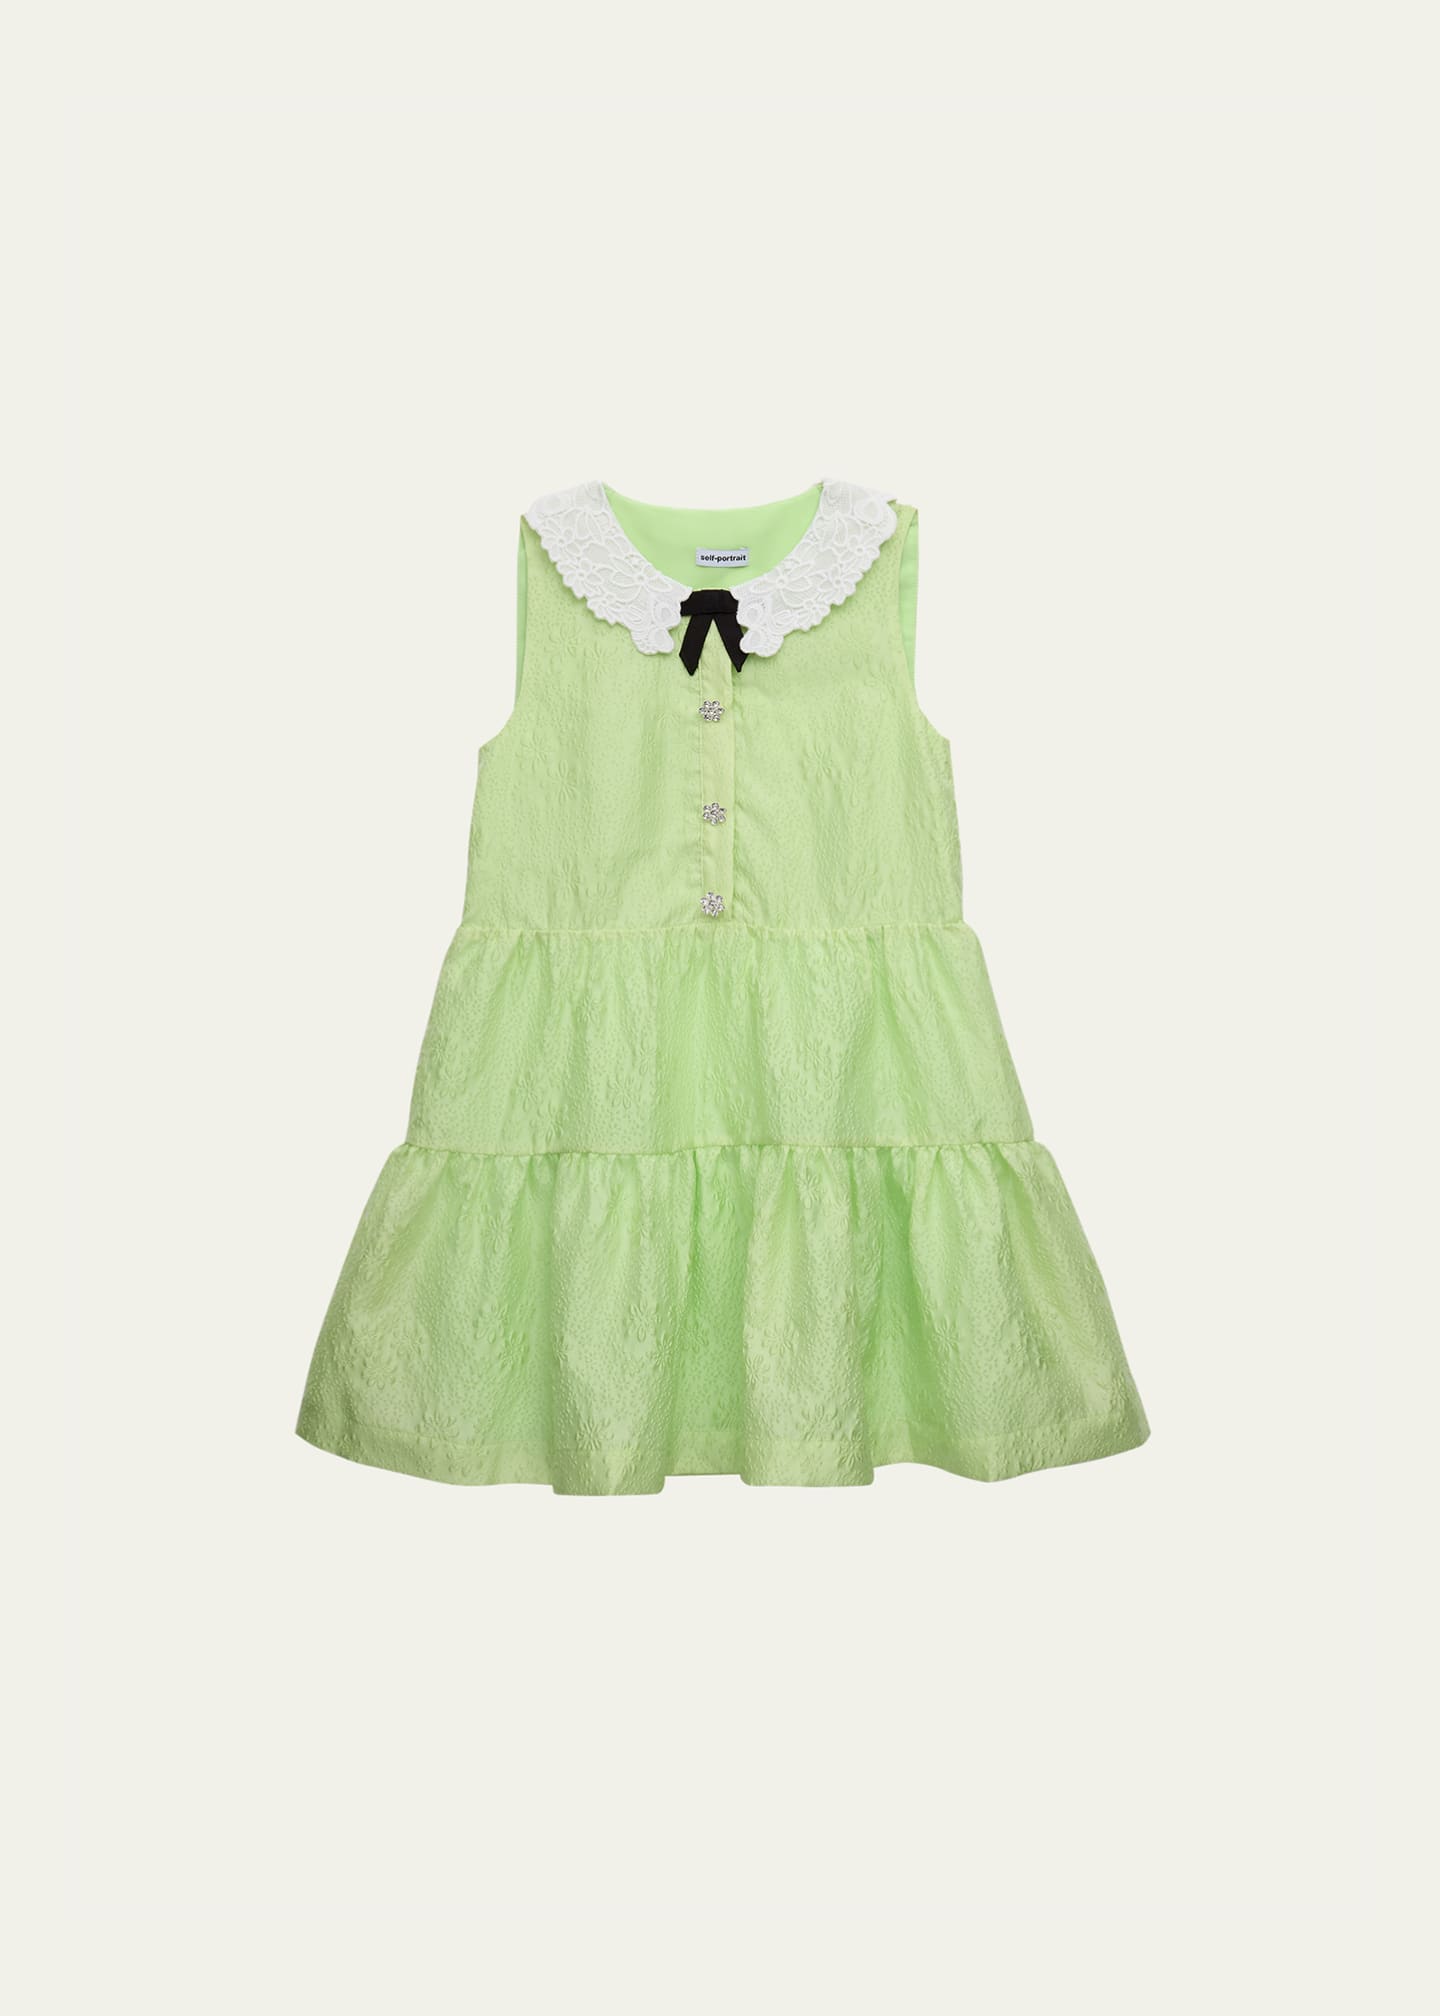 Self-Portrait Girl's Tiered Lace Collar Cotton Dress, Size 3T-12